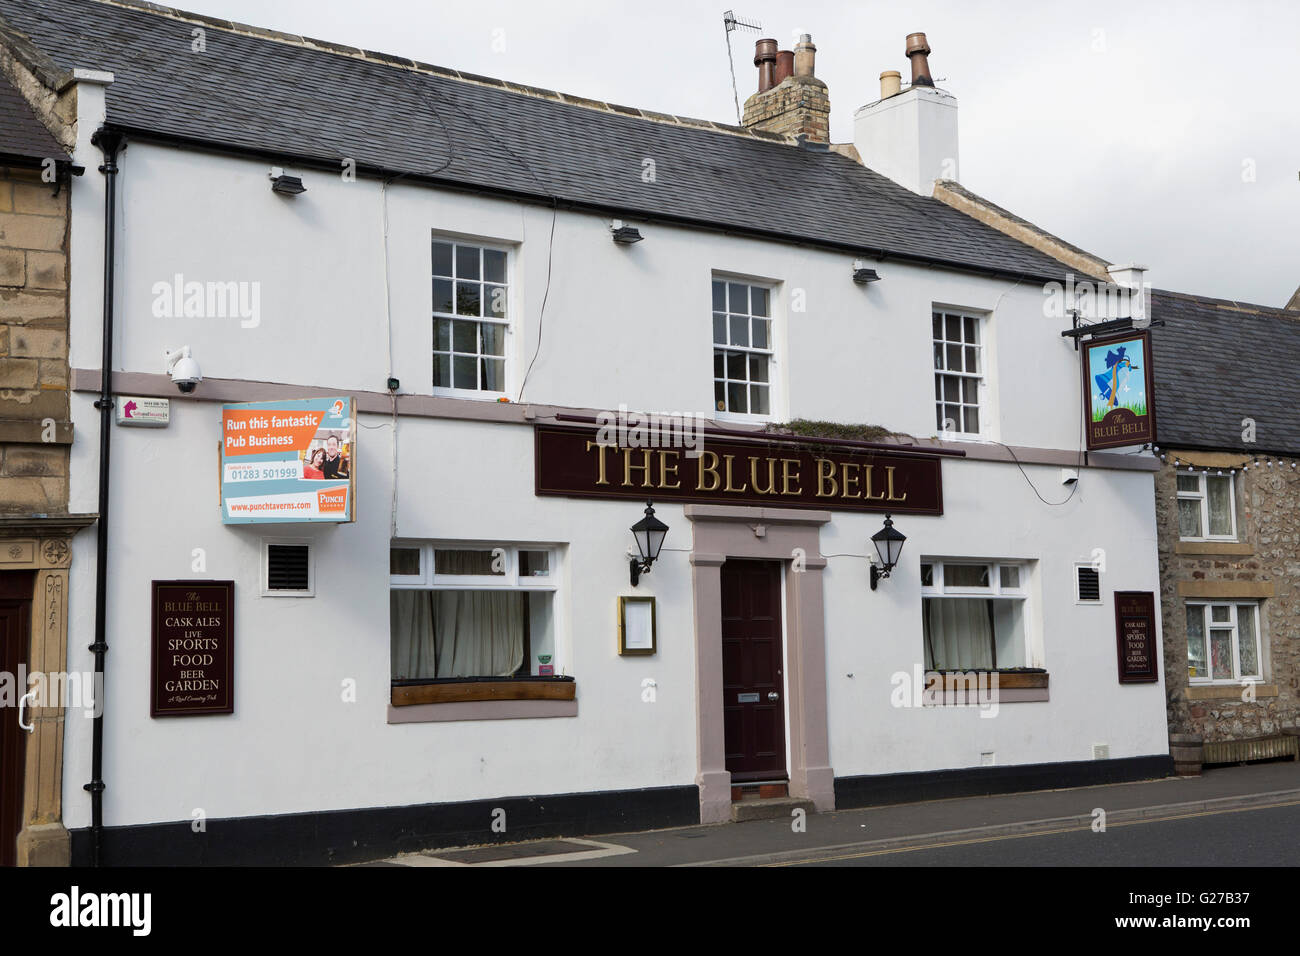 The Blue Bell pub in Corbridge, England. The town stands in the country's most northerly county, Northumberland. Stock Photo